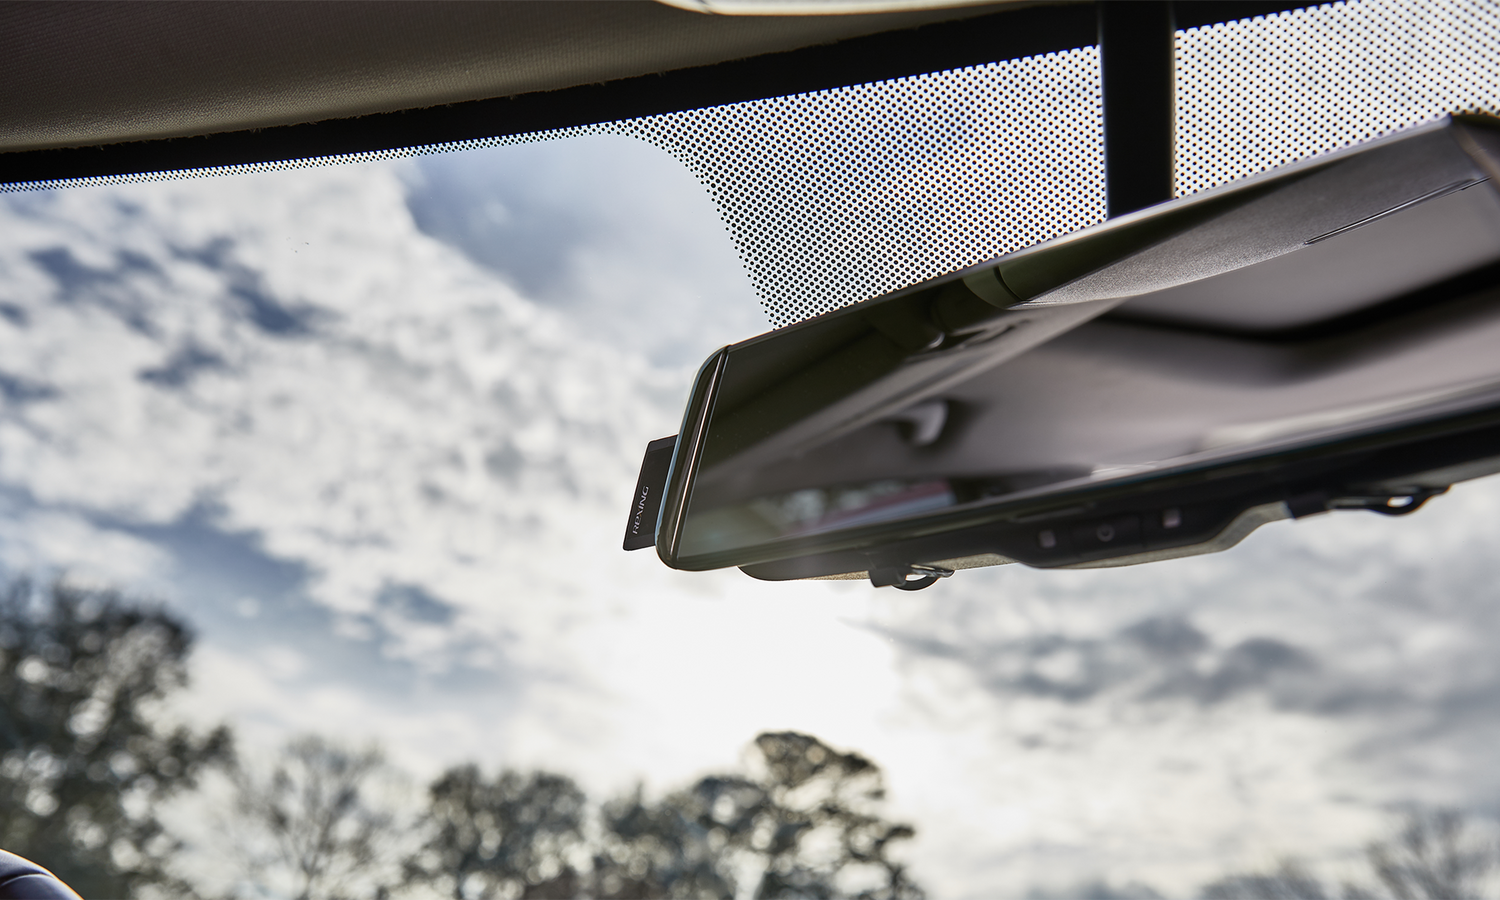 What is Dash Cam Form Factor?